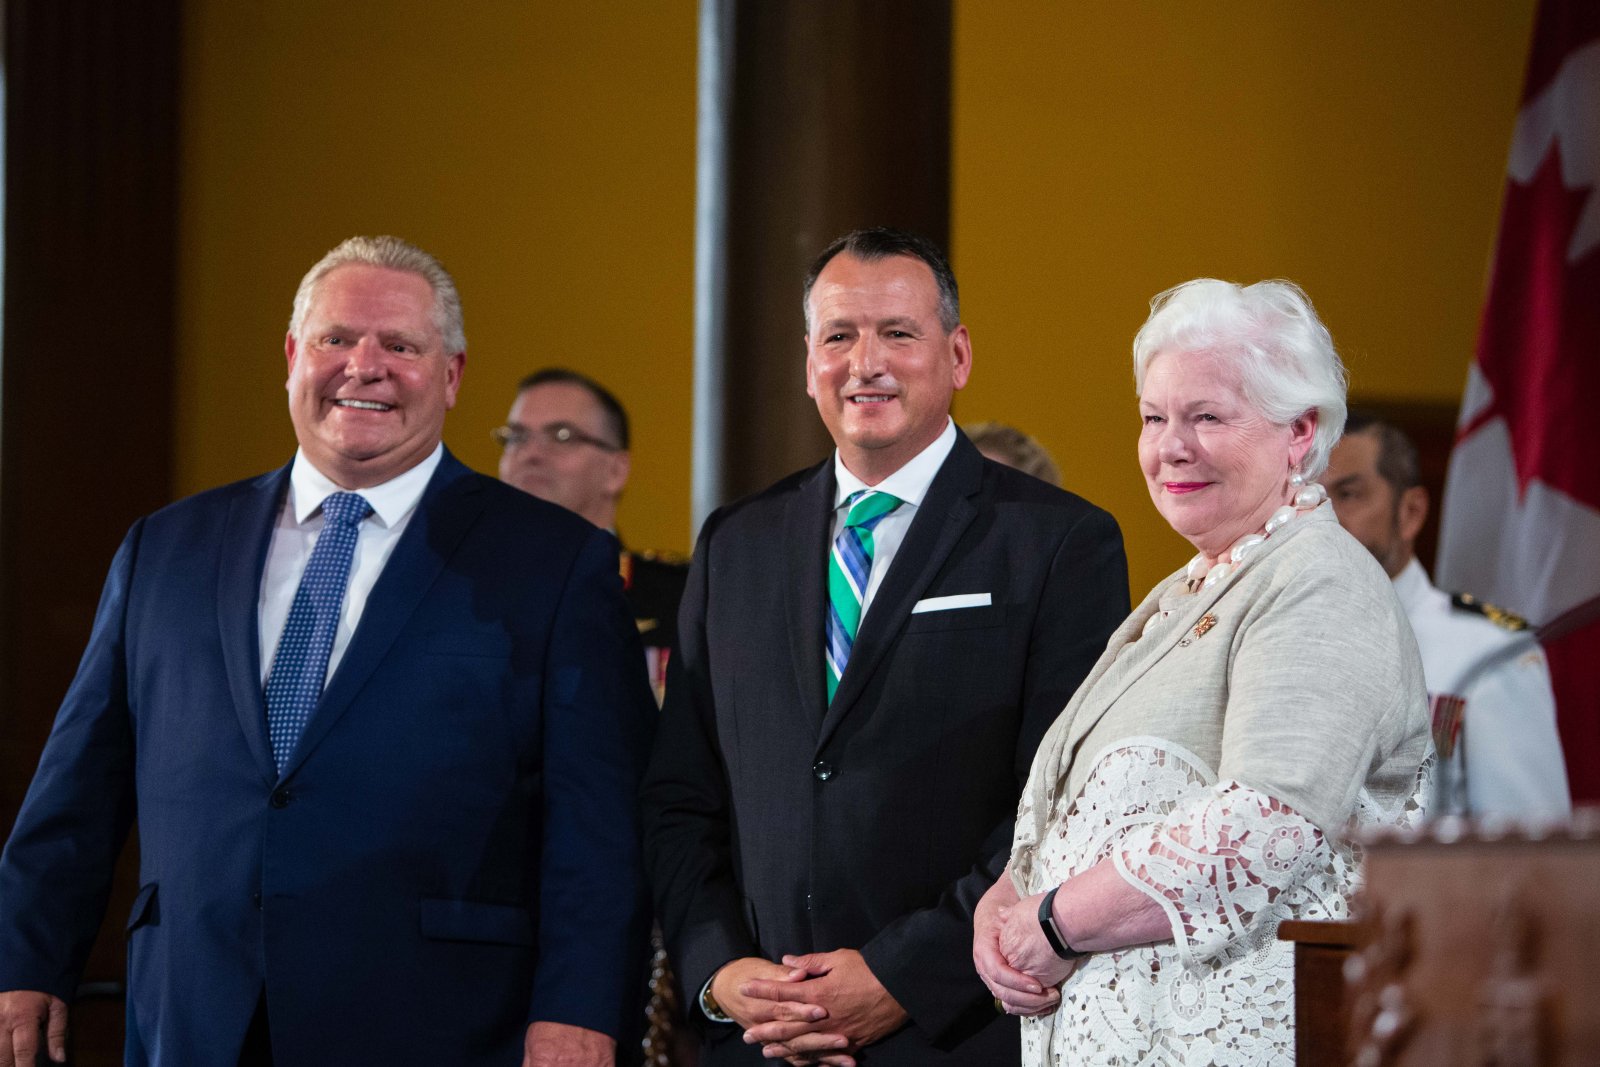 Ontario Premier Doug Ford, Indigenous Affairs Minister Greg Rickford, and Ontario Lieutenant Governor Elizabeth Dowdeswell take part in a cabinet swearing-in ceremony at Queen's Park in Toronto on June 29, 2018. Photo by Alex Tétreault